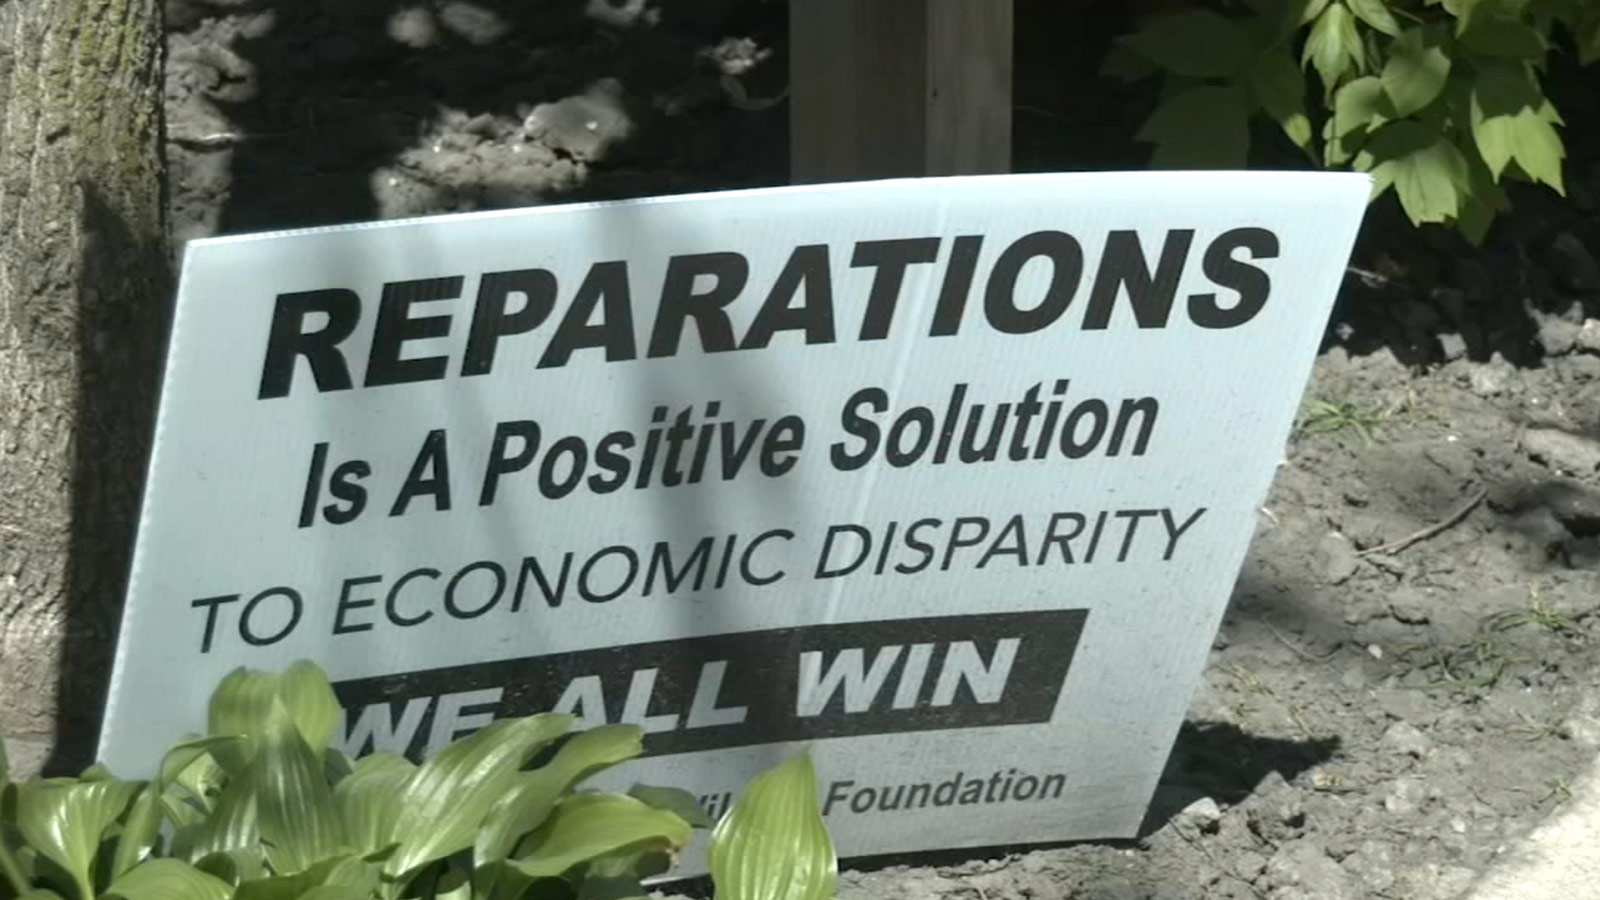 Sign: Reparations is a positive solution to economic disparity. We all win.